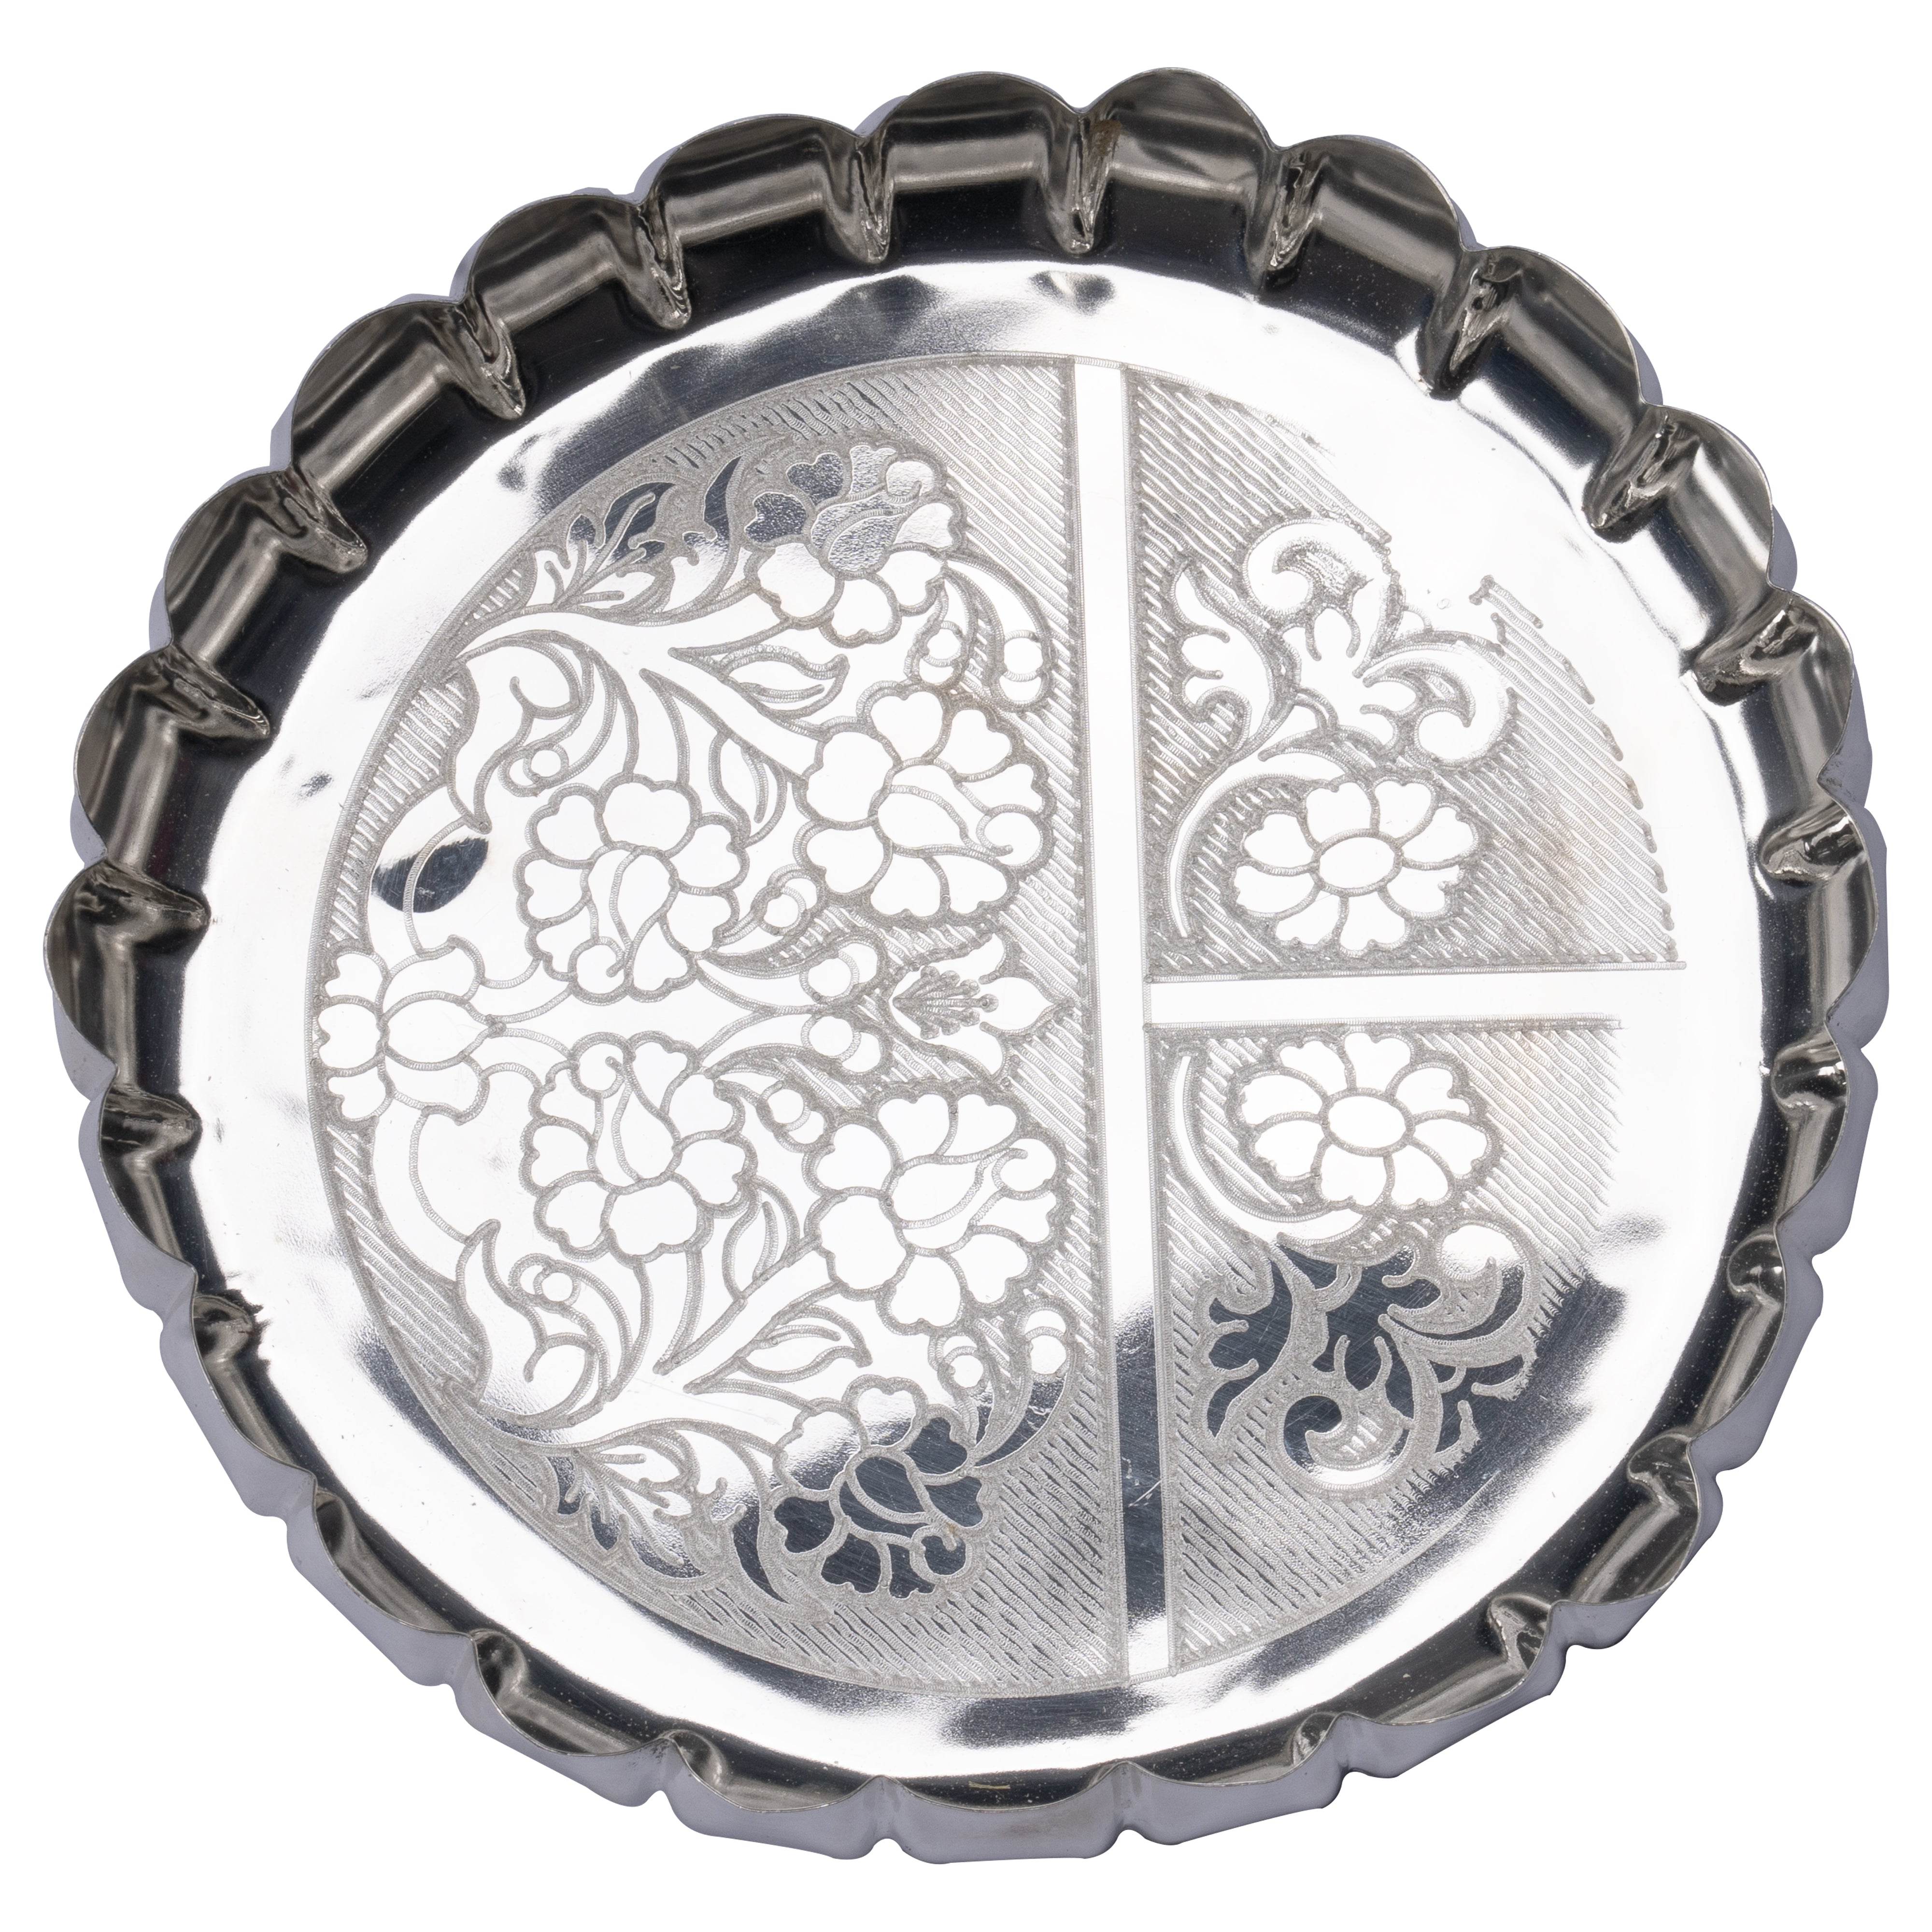 Sigaram 9 Inch German Silver Floral Designed Plate with Lay For Home Pooja Decor K4405